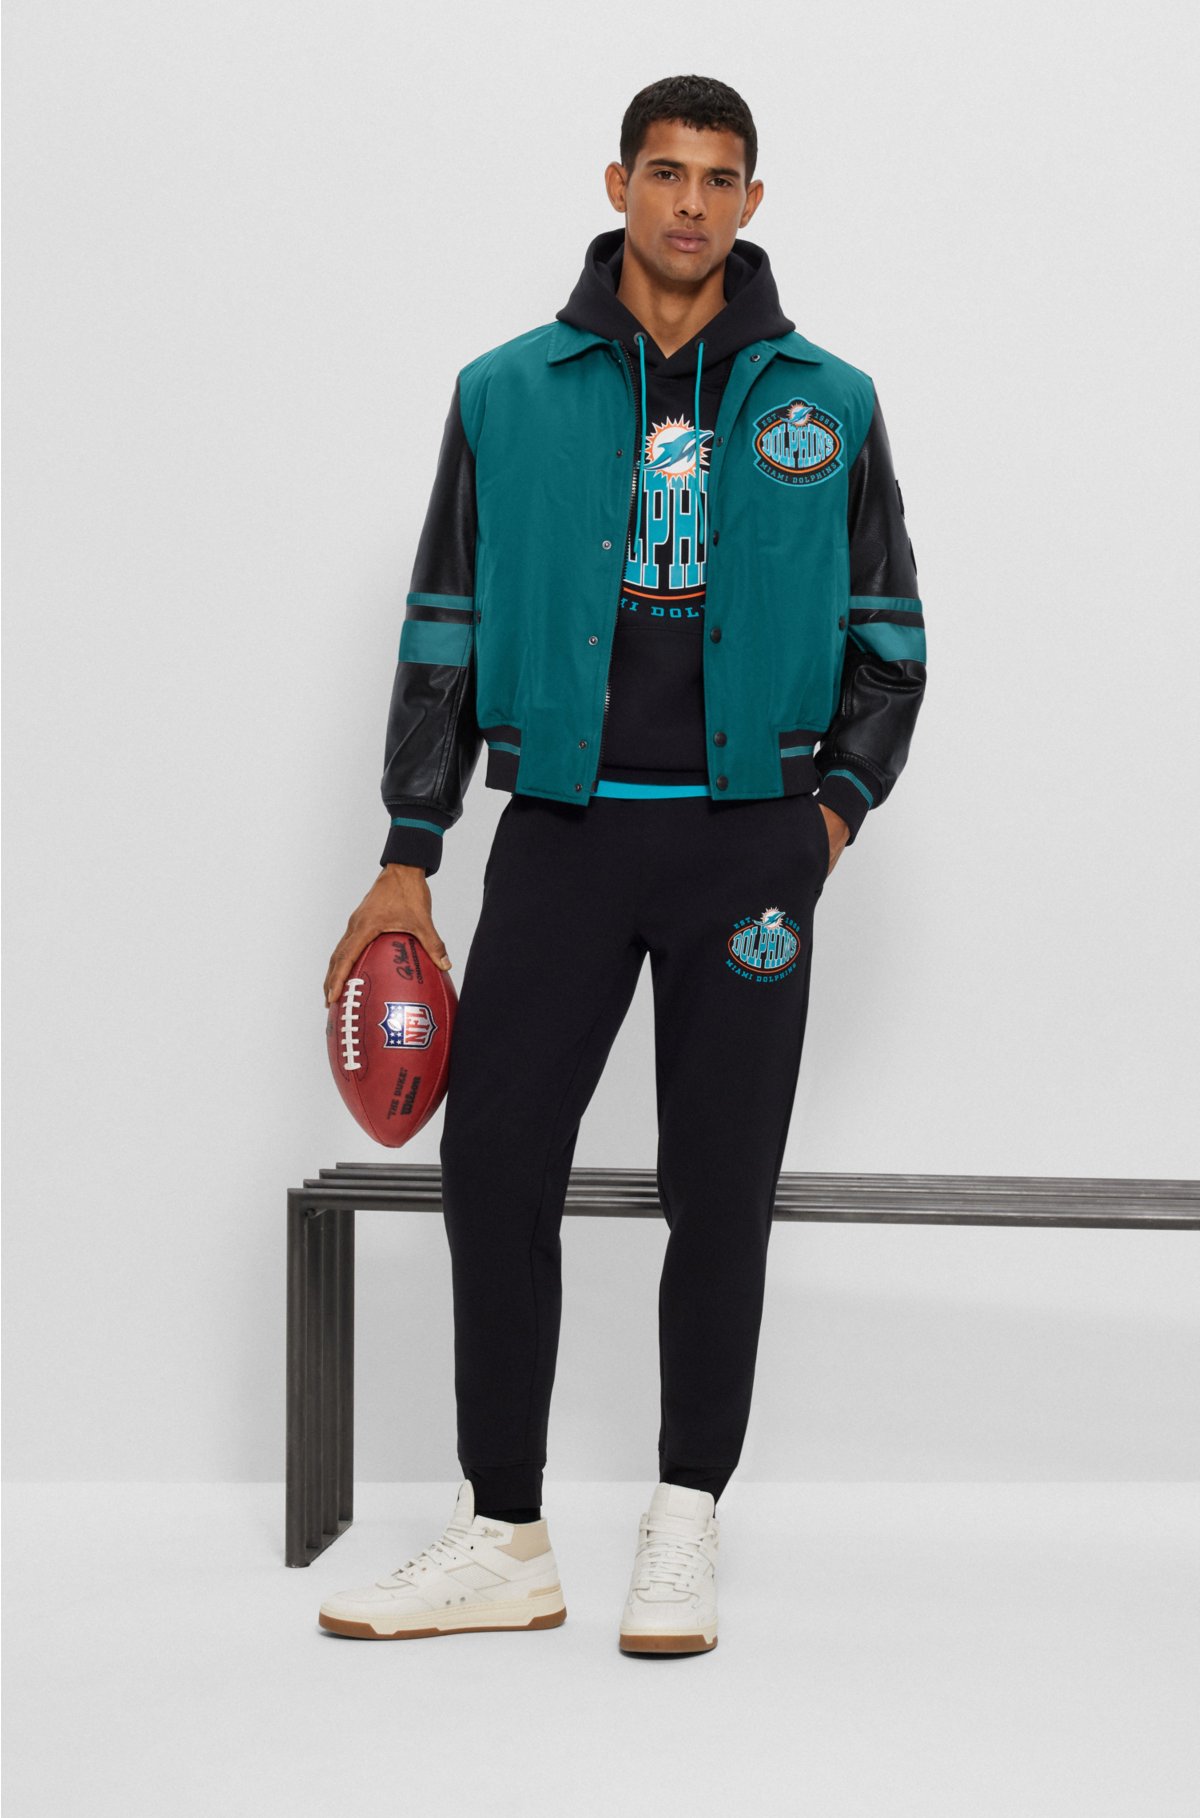  BOSS x NFL water-repellent bomber jacket with collaborative branding, Dolphins